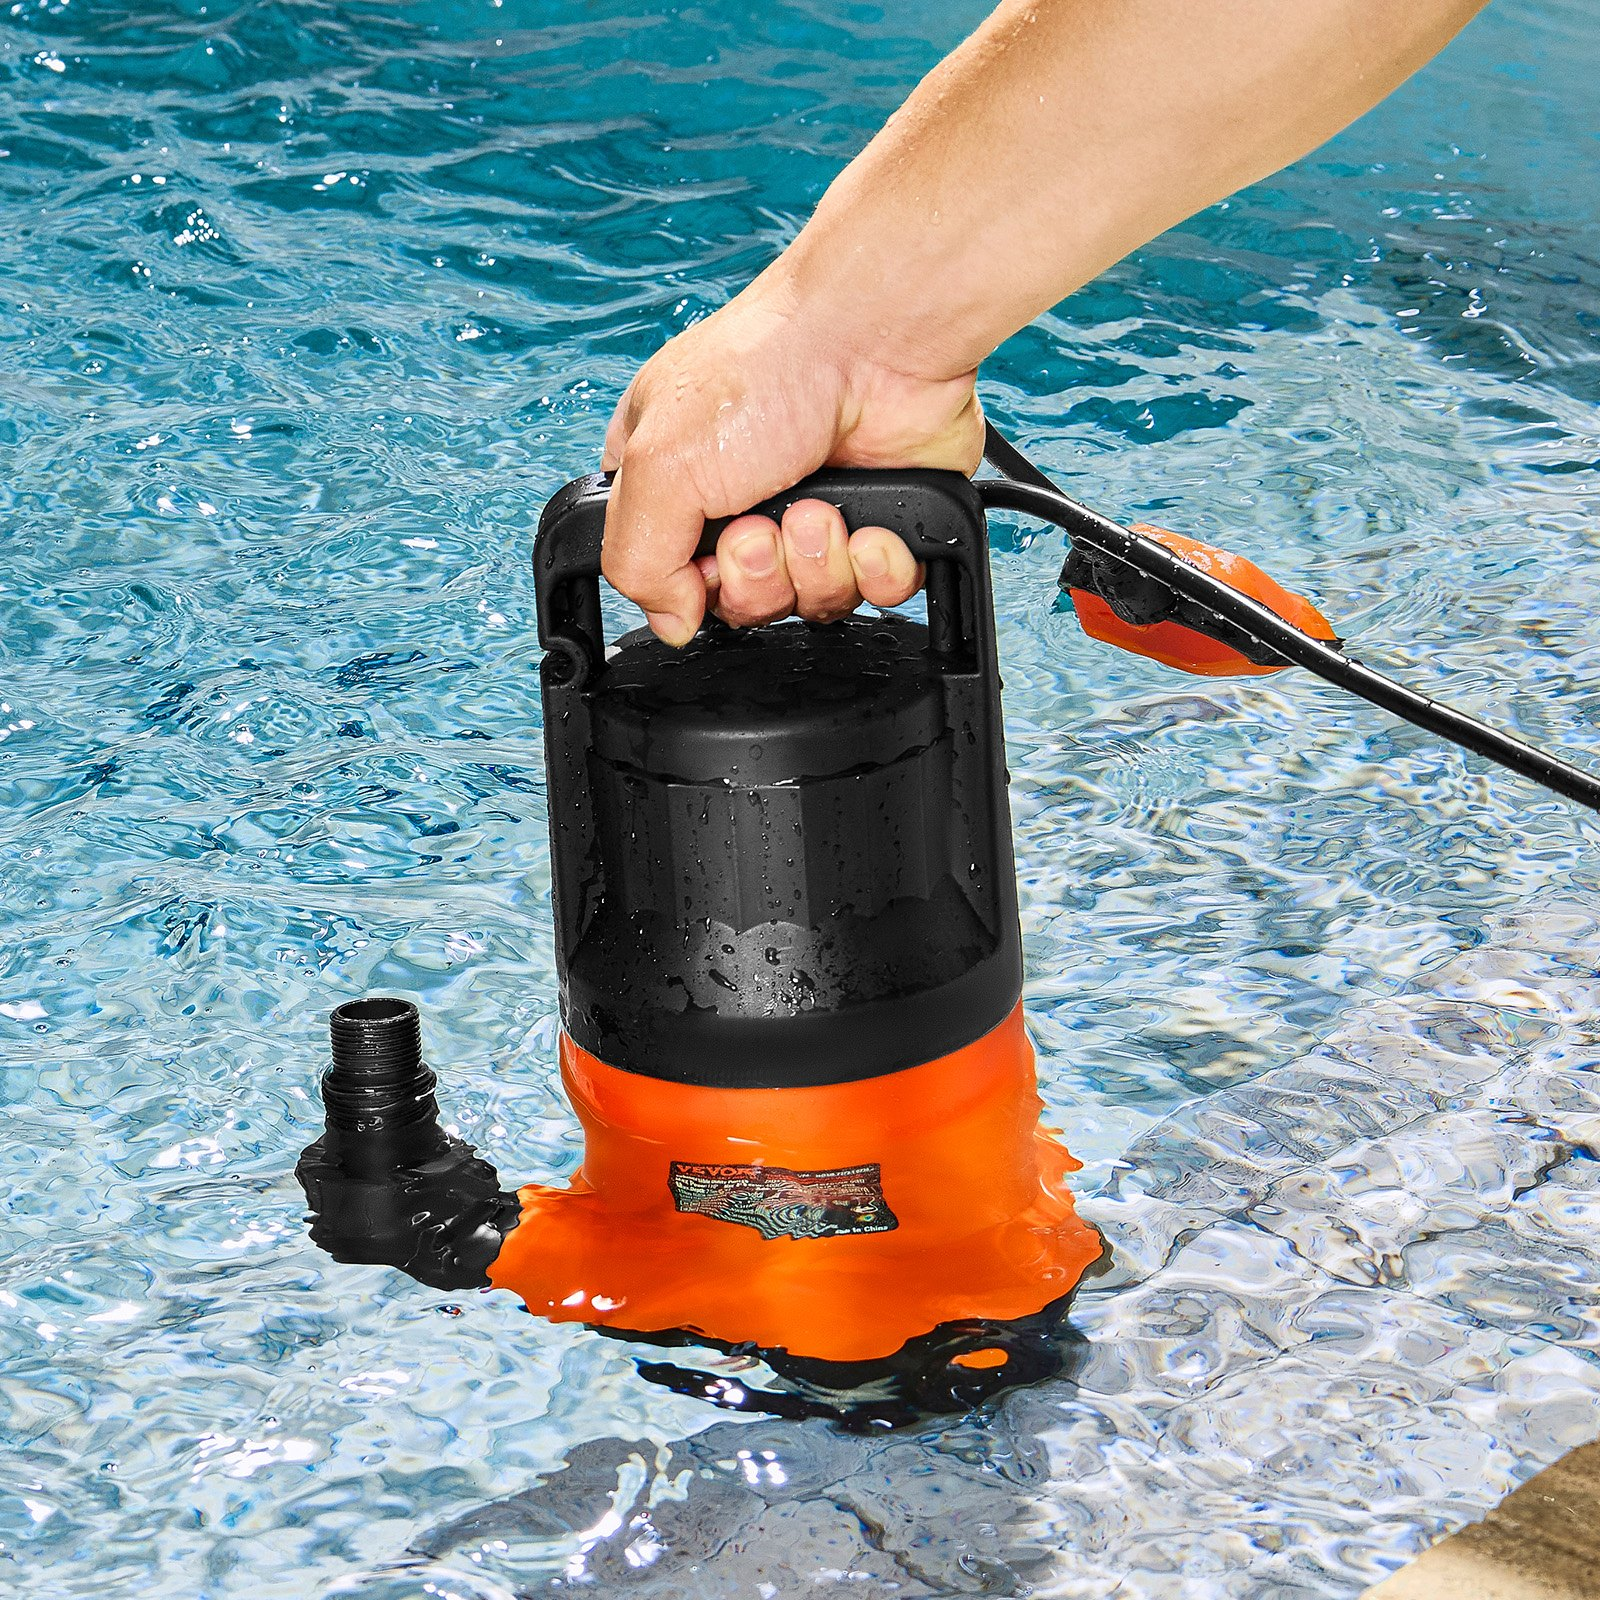 VEVOR Utility Pump, 1 HP, 4000 GPH High Flow, 31 ft Head, Sump Pump Submersible Water Pump Portable Utility Pump with 10 ft Long Power Cord for Draining Water from Swimming Pool Garden Pond Basement, Goodies N Stuff